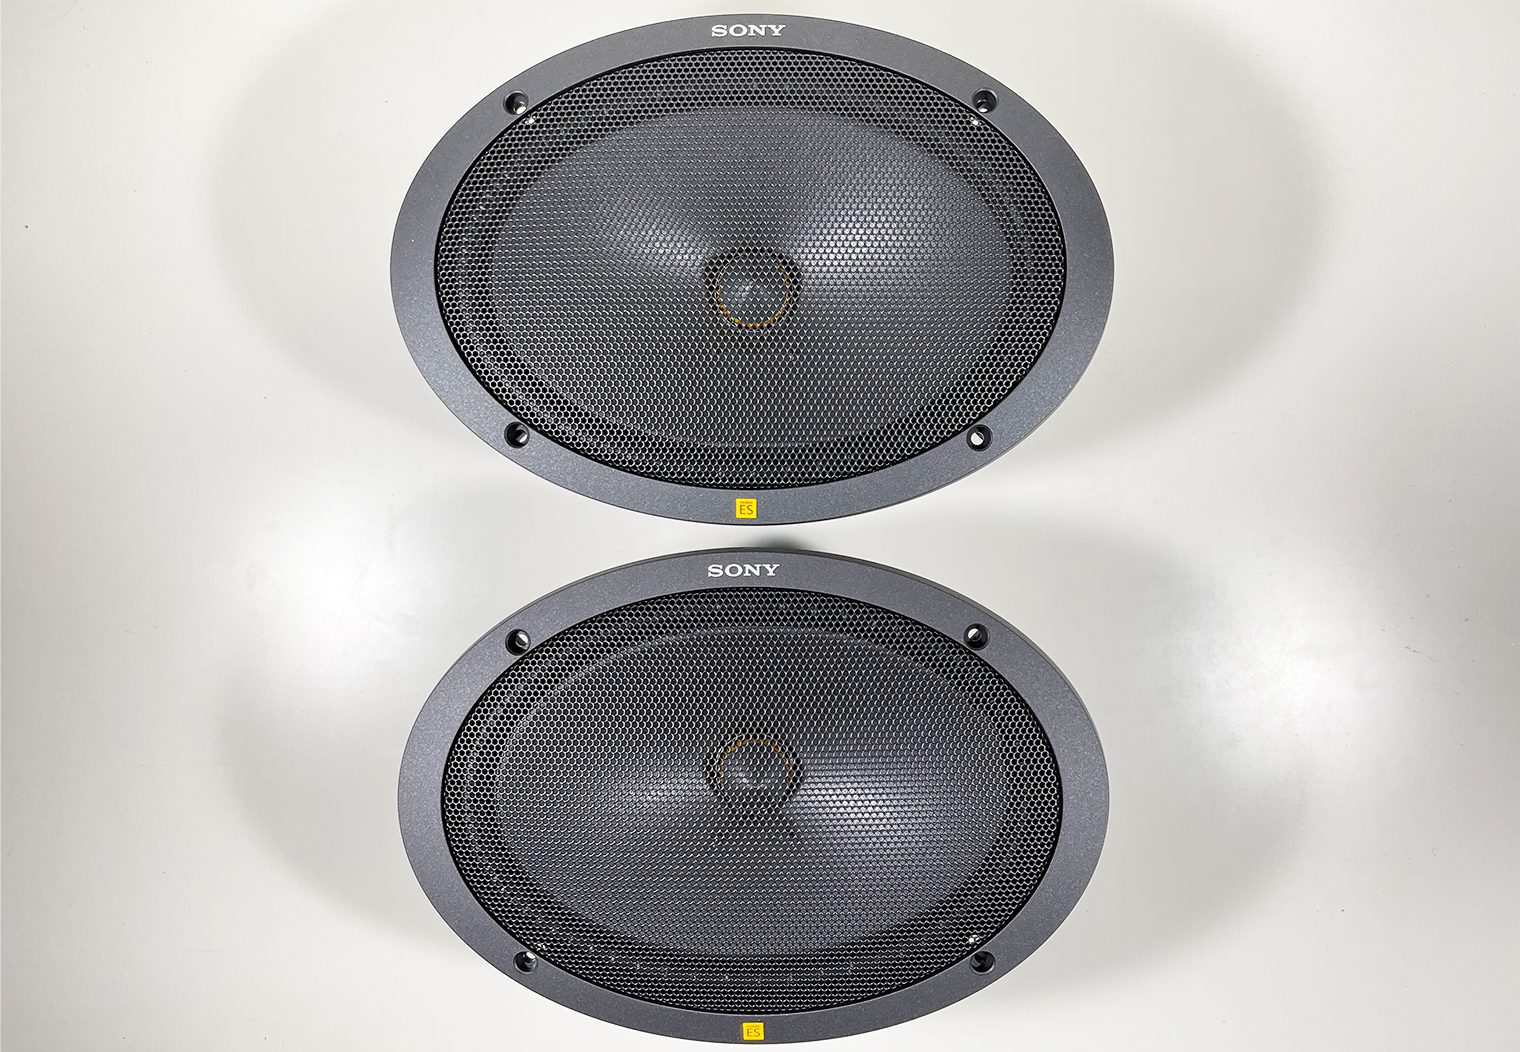 Sony XS-692ES speakers with grille on